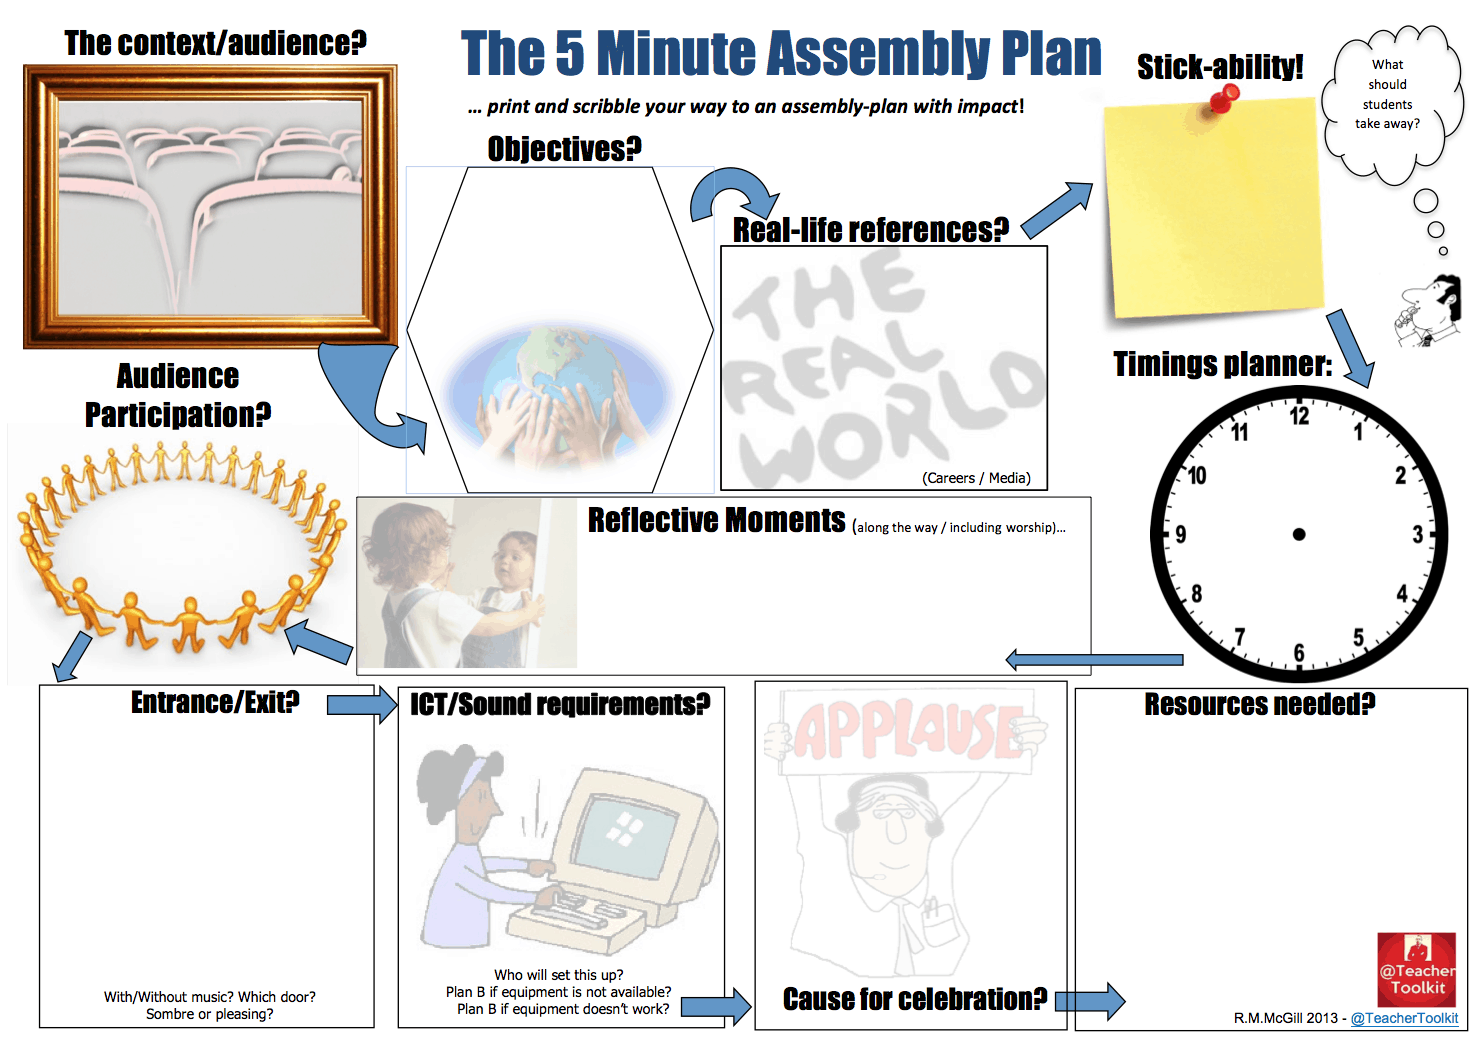 2. The 5 Minute Assembly Plan